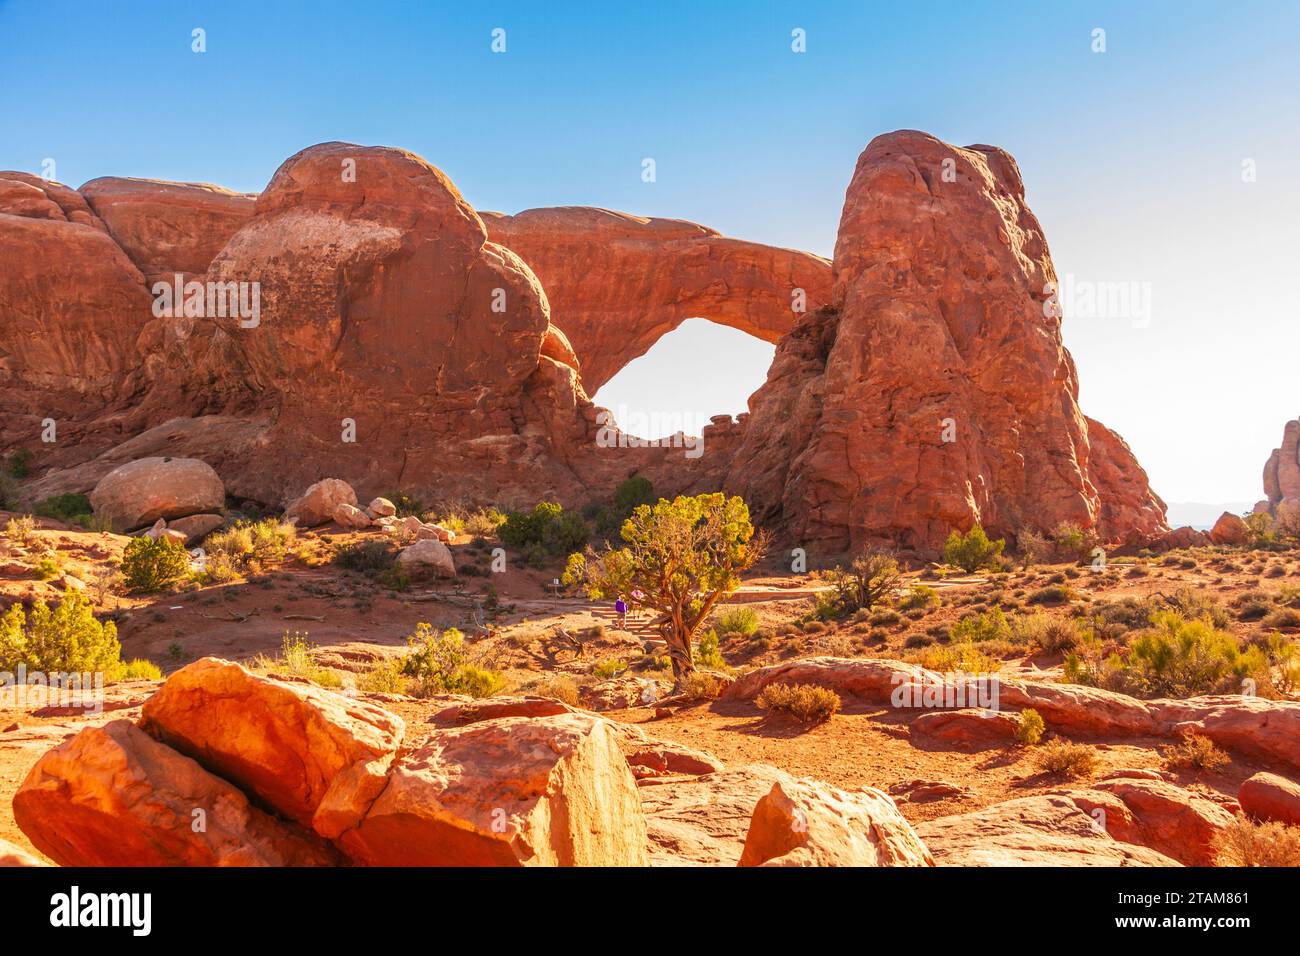 South Window arch sandstone rock formation in early morning light in Arches National Park in Utah. Stock Photo